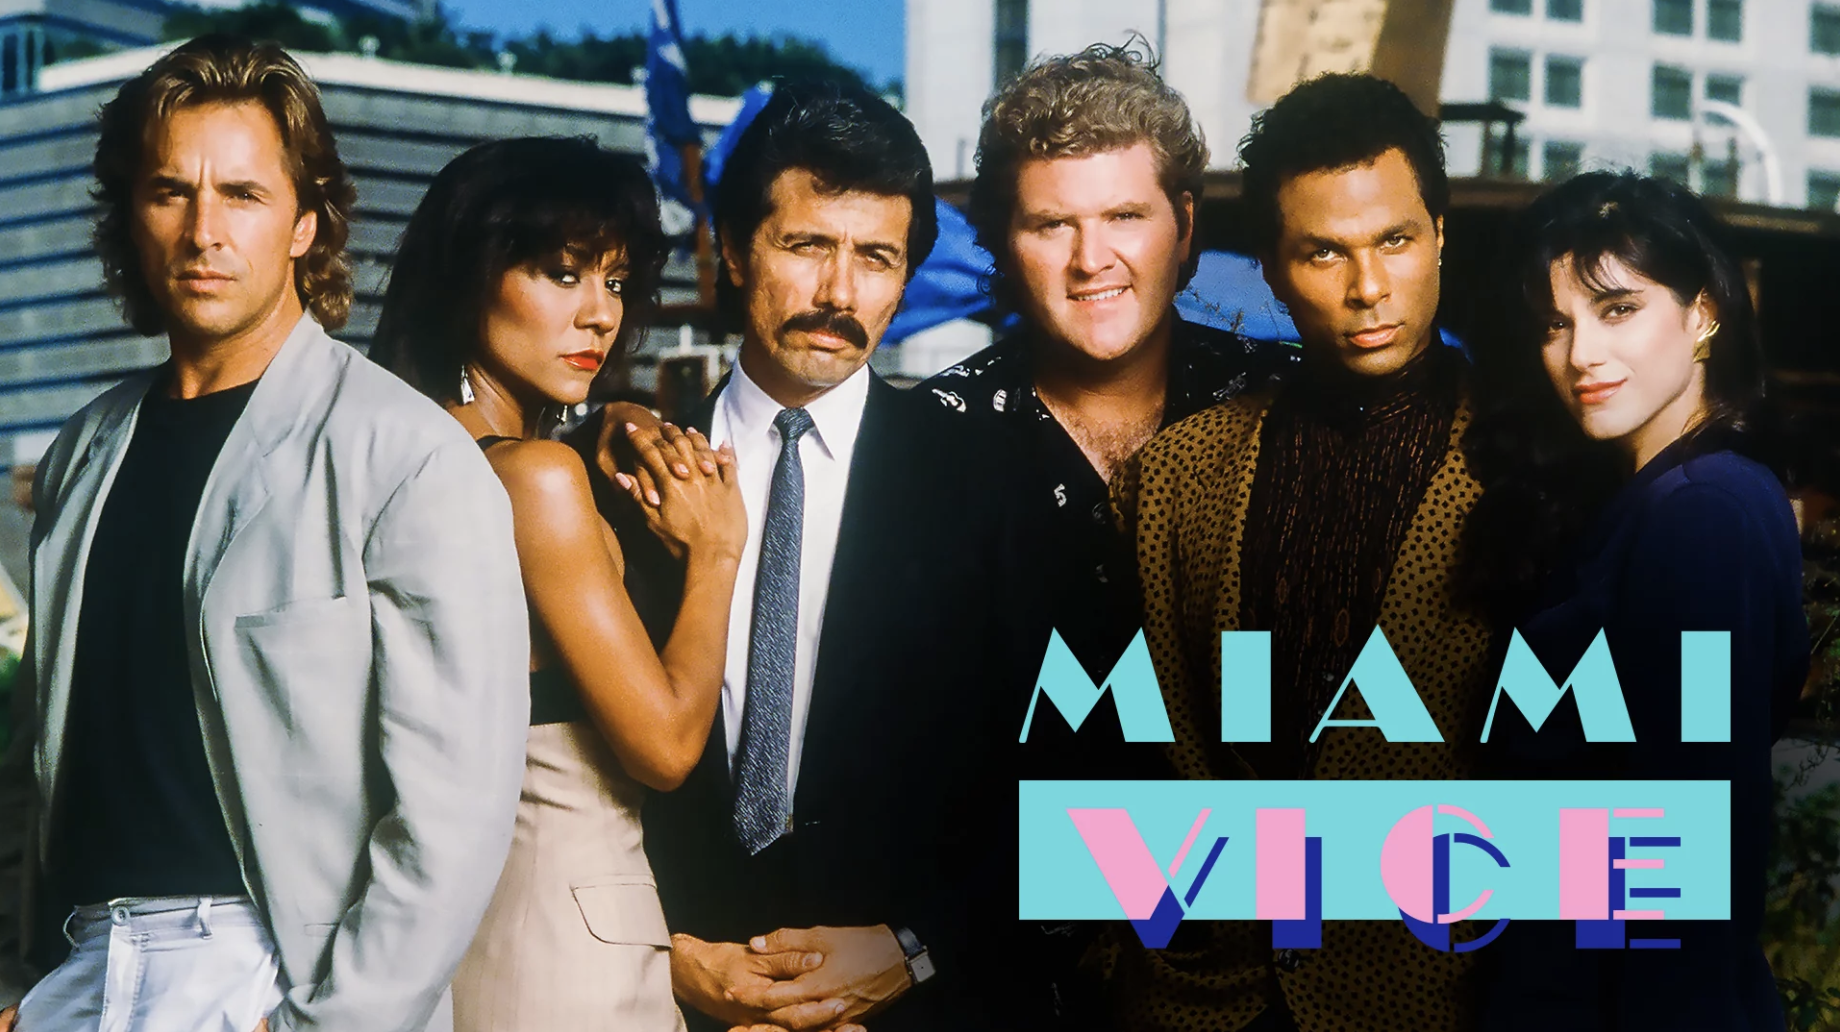 The Miami Vice cast in a posed photograph